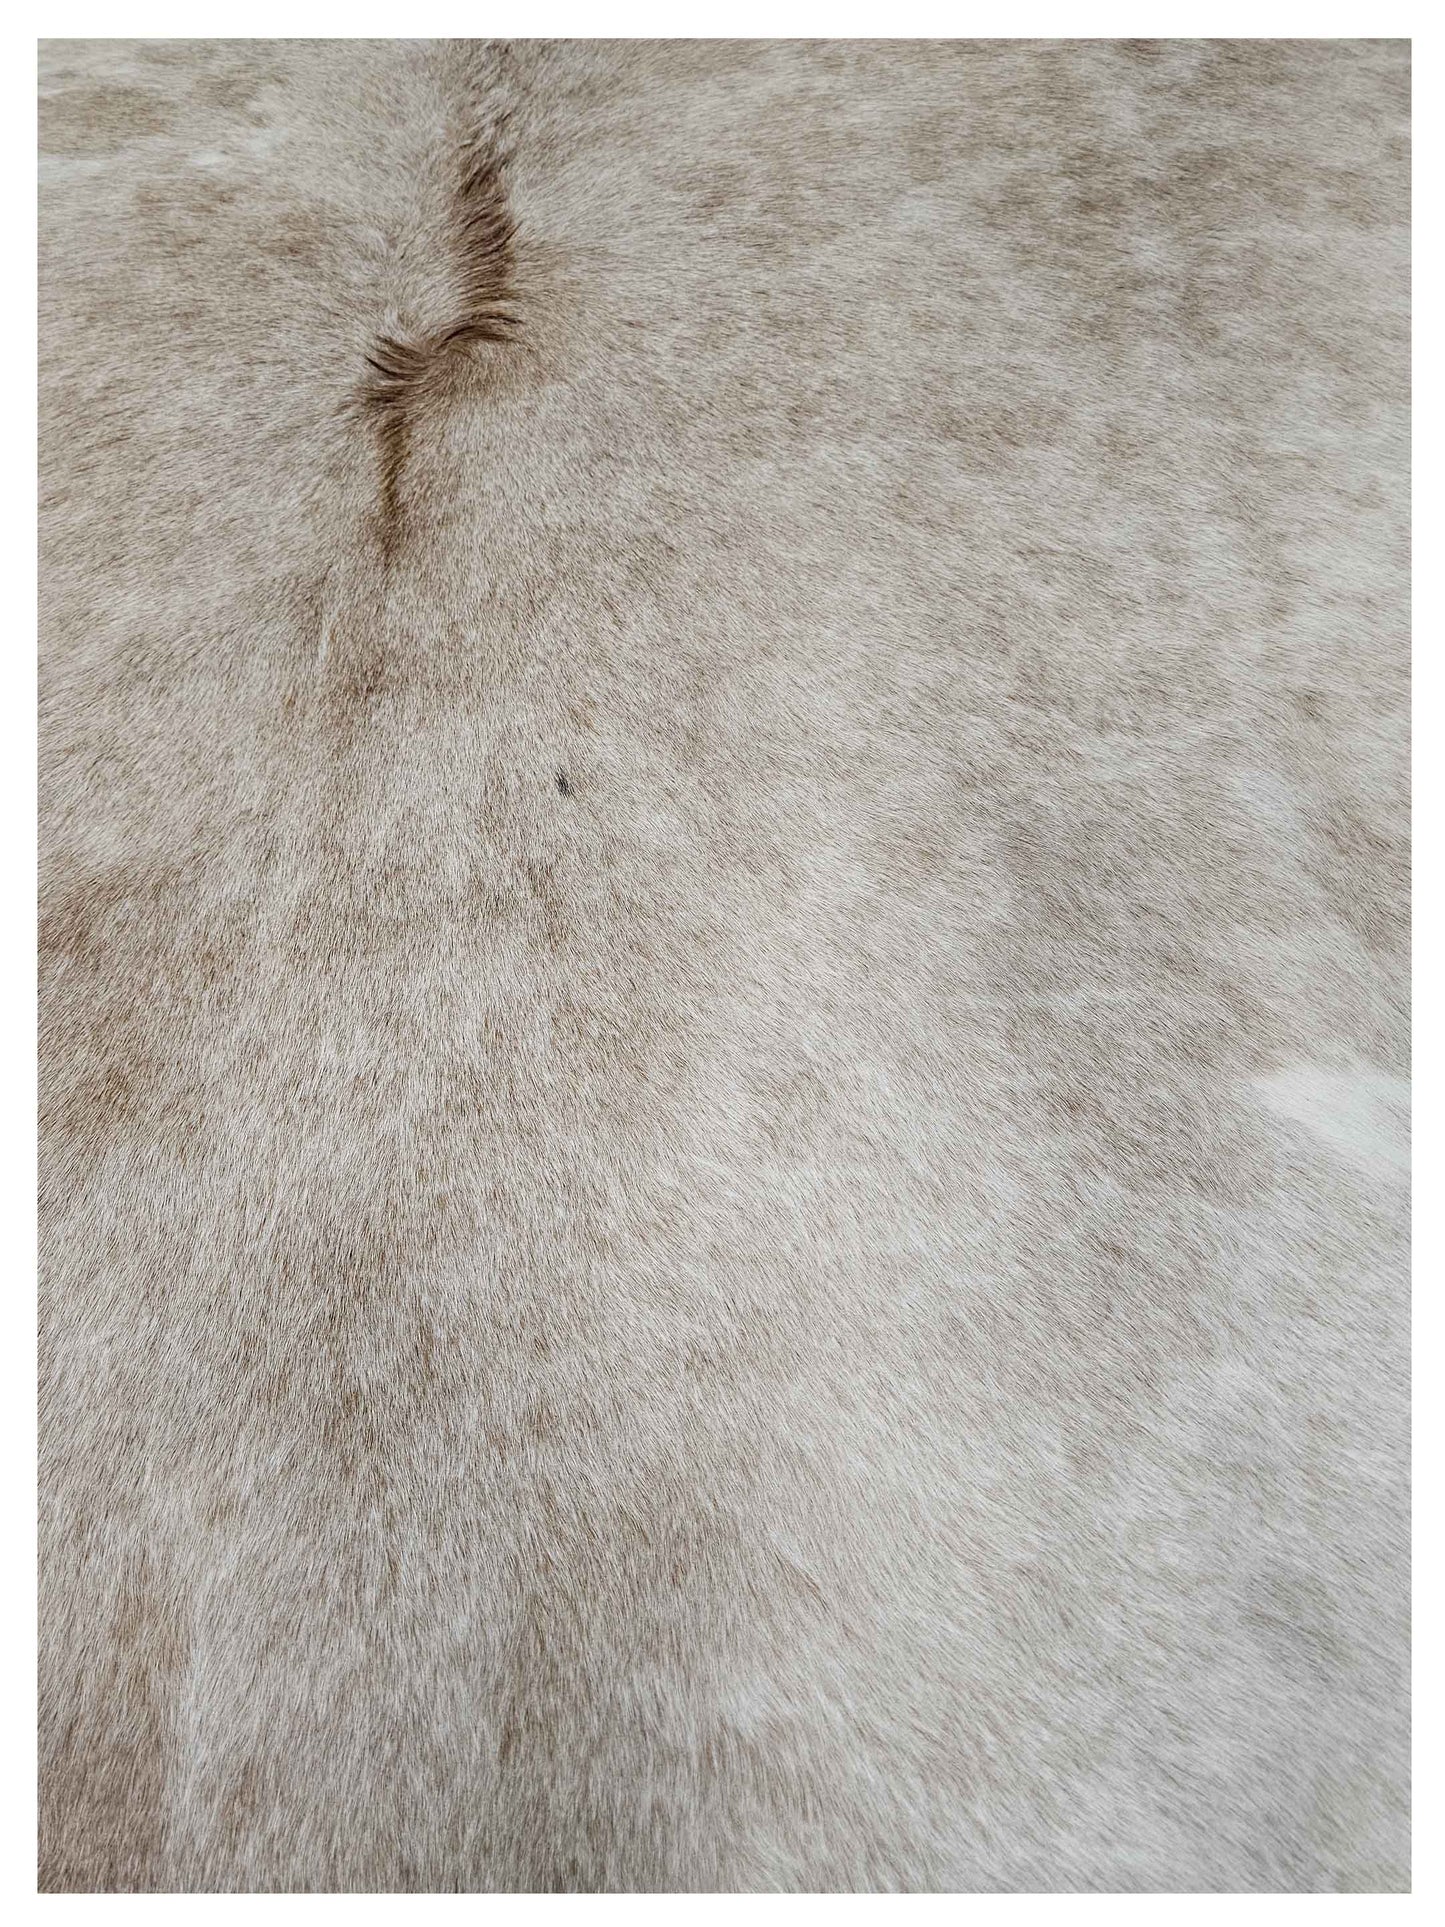 Artisan Claire  Mocha  Hair on Hide Crafted Rug